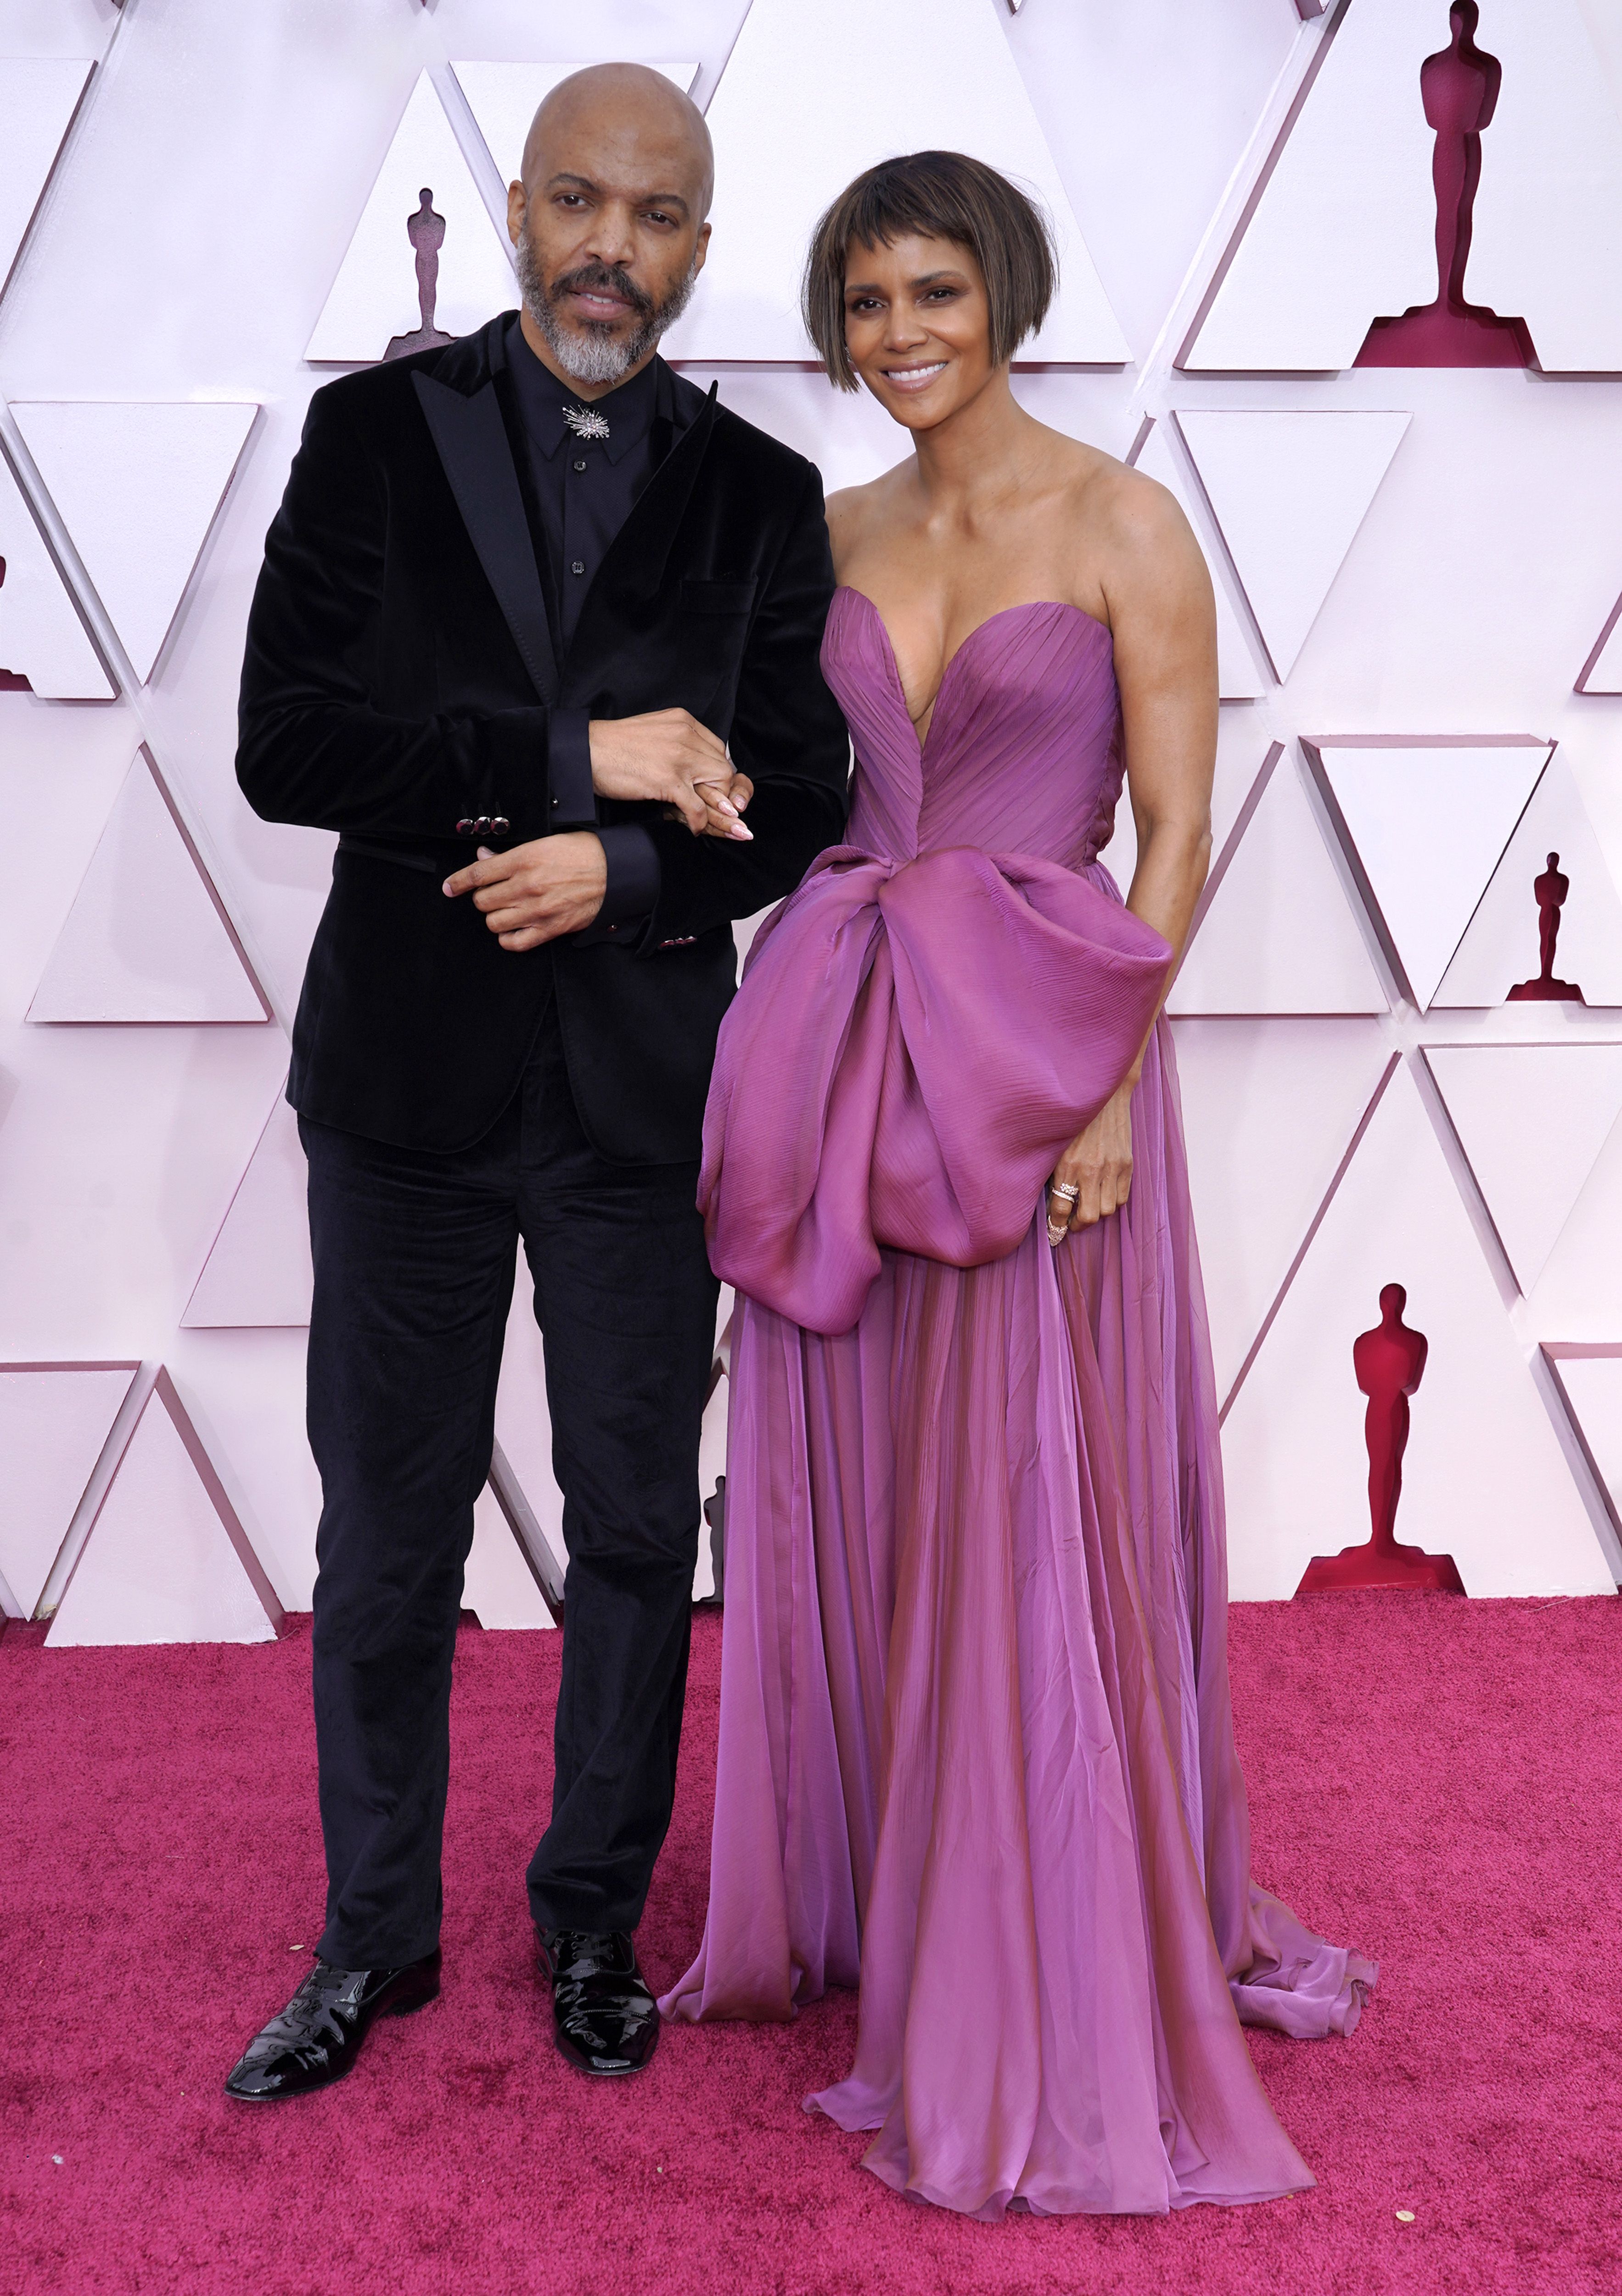 Halle Berry Goes Full Glam in Gorgeous Oscars 2021 Dress